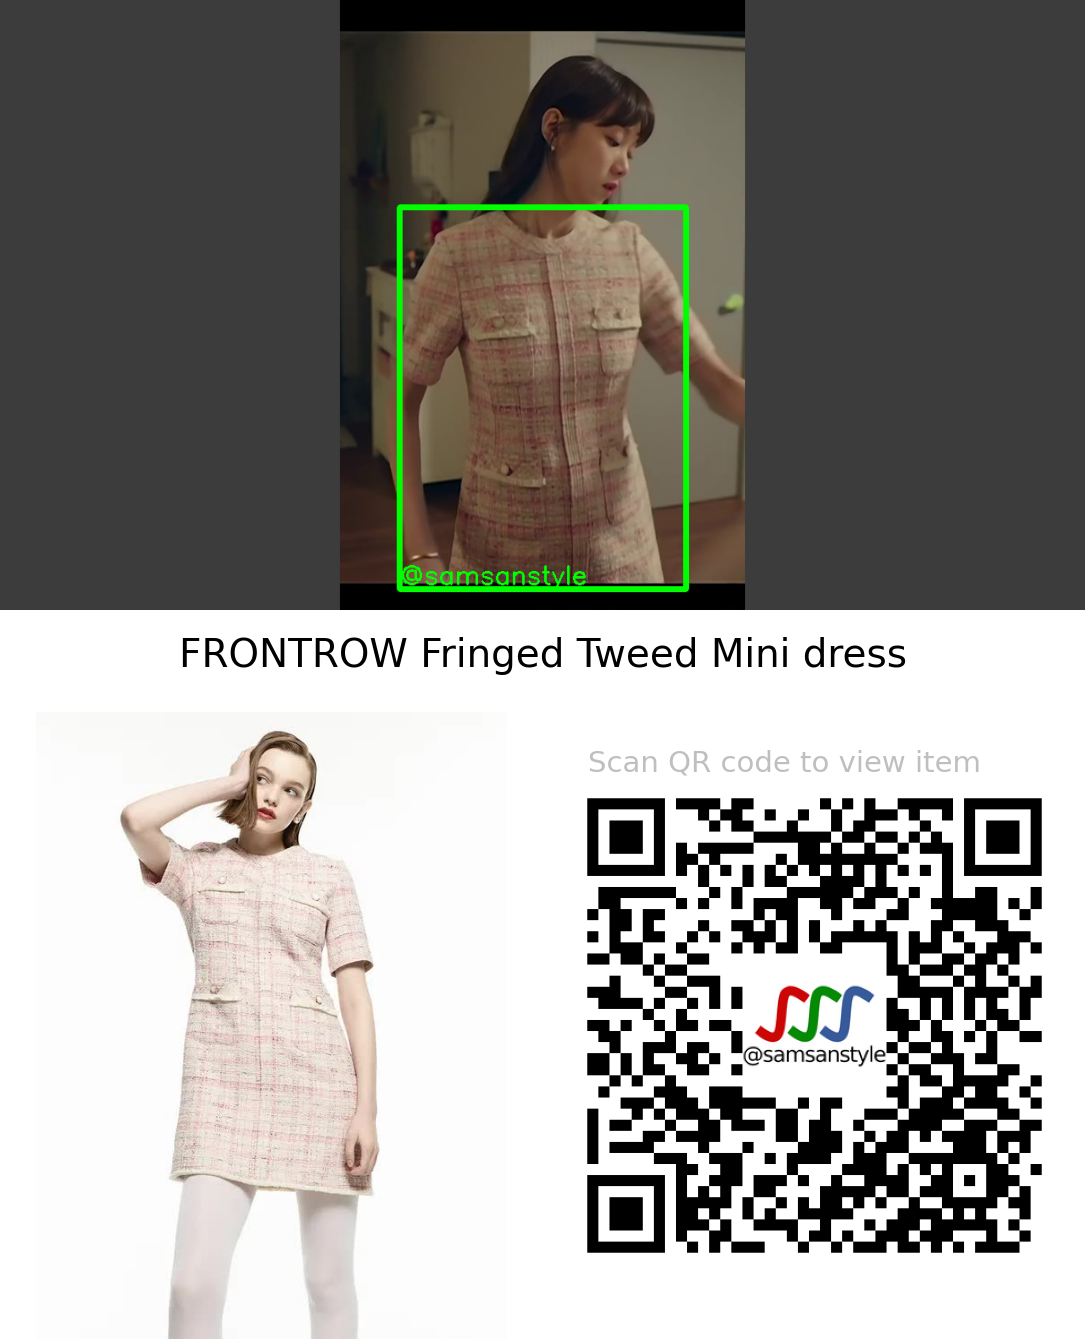 Lee Sungkyung | Shooting Stars E01 | FRONTROW Fringed Tweed Mini dress